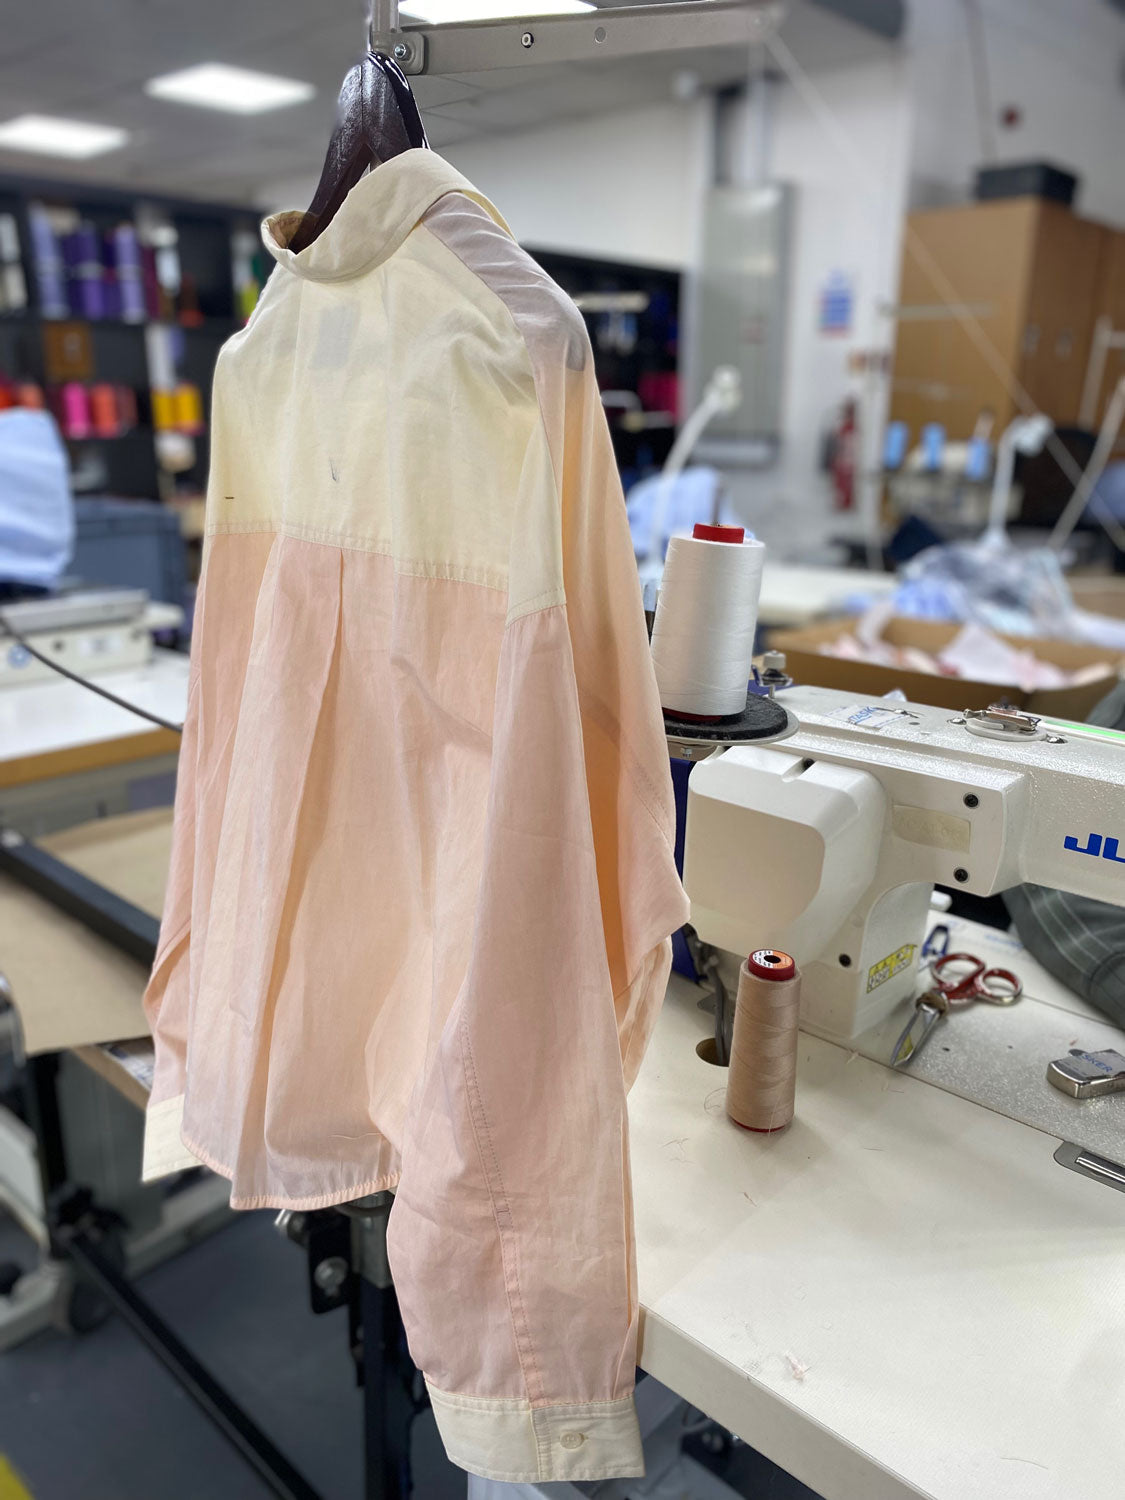 Sustainable cotton shirts made in London - Saywood's pastel orange and lemon womens Lela Shirt hangs in a factory, where sewingmachines and threads can be seen in the background